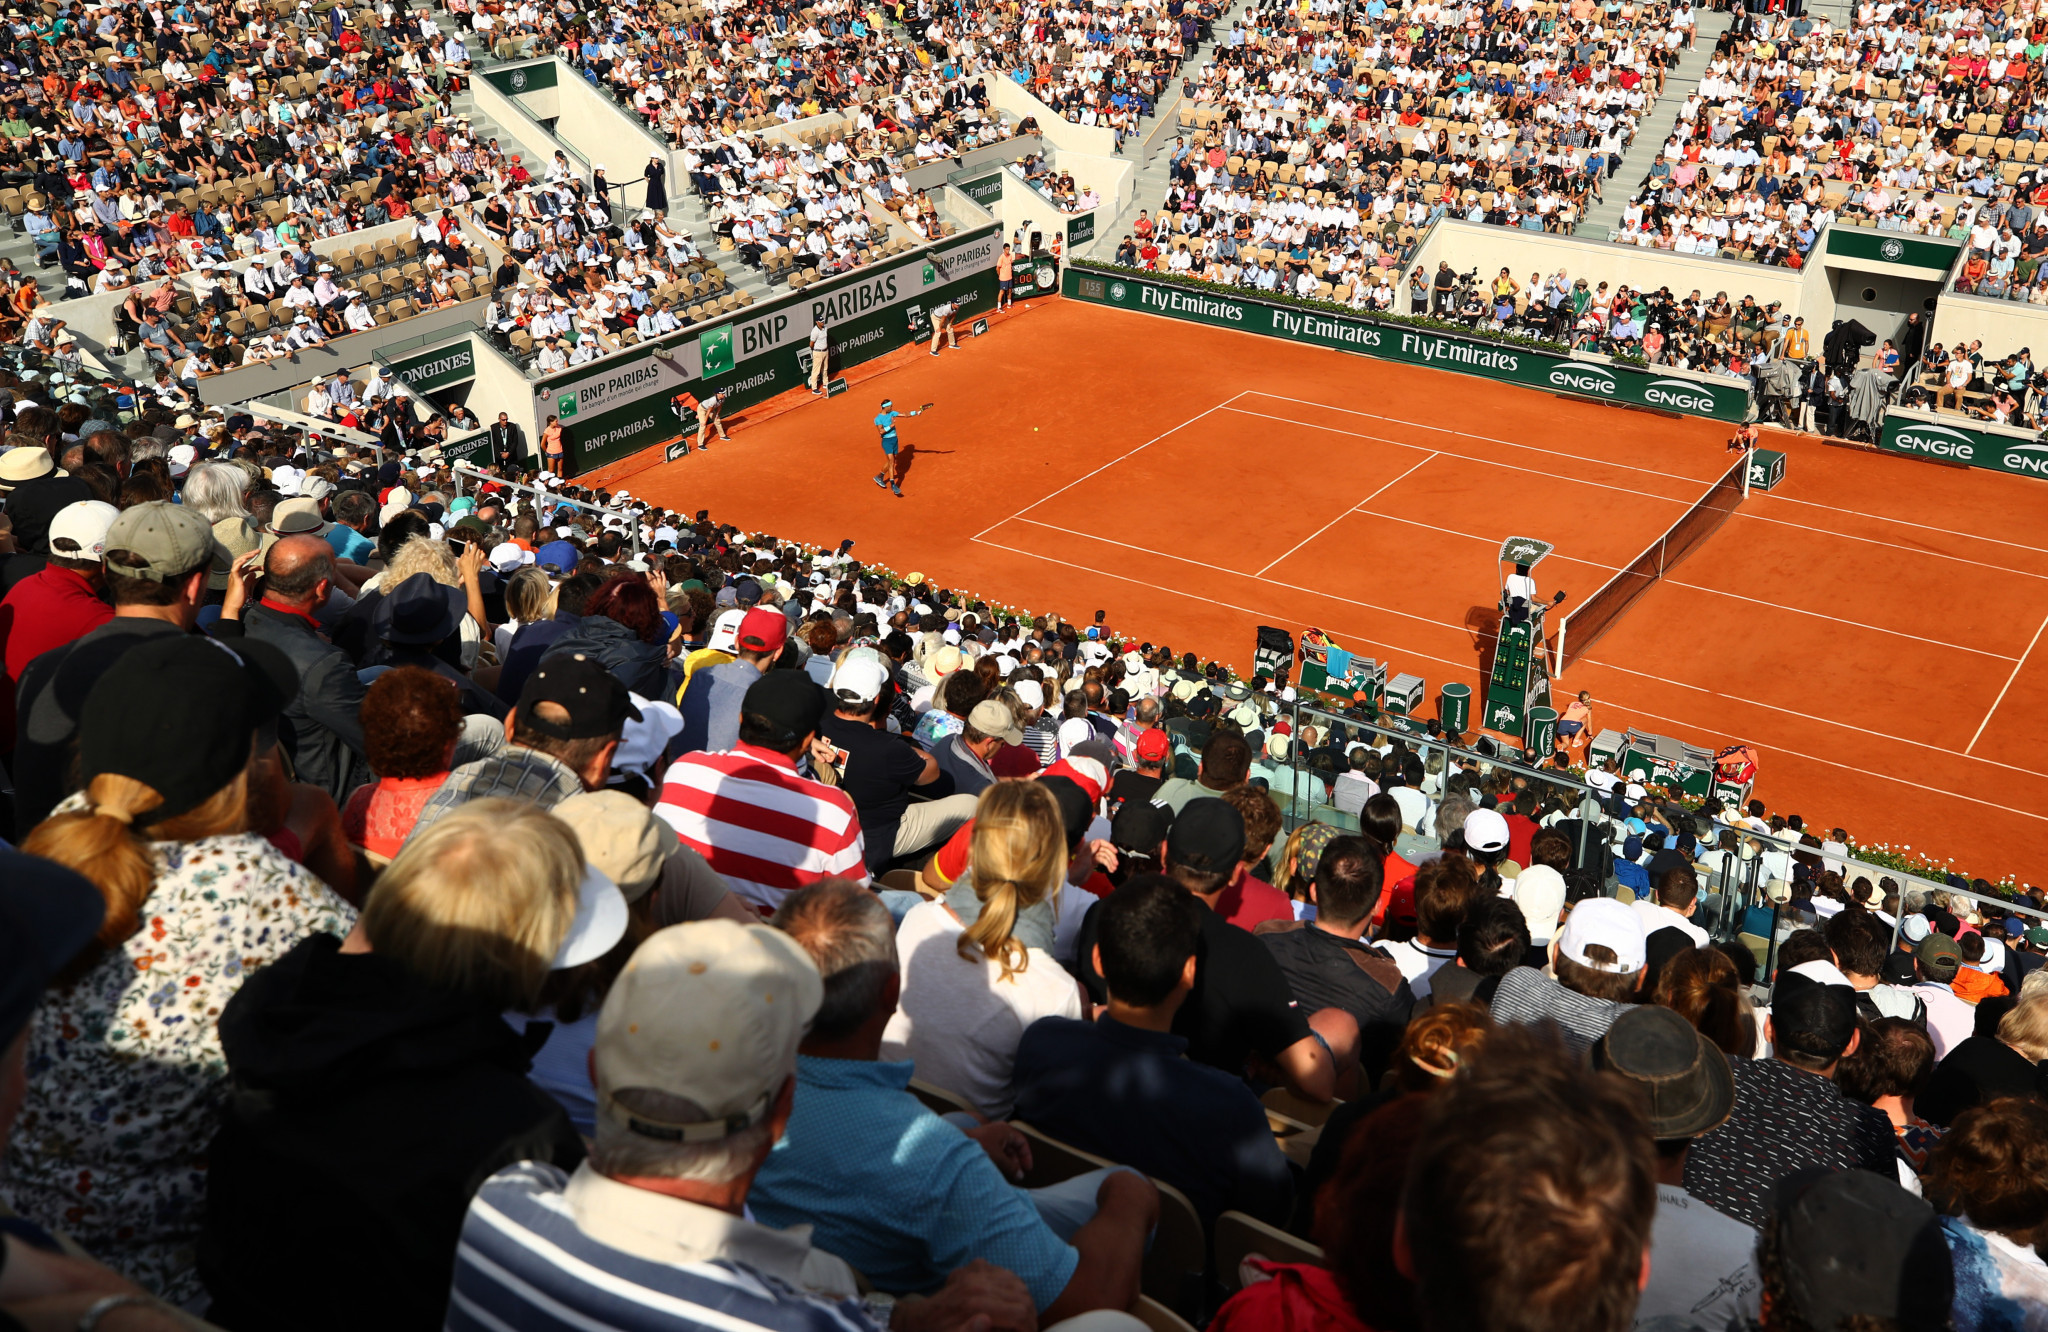 The French Open, originally scheduled for March, will now start in September ©Getty Images